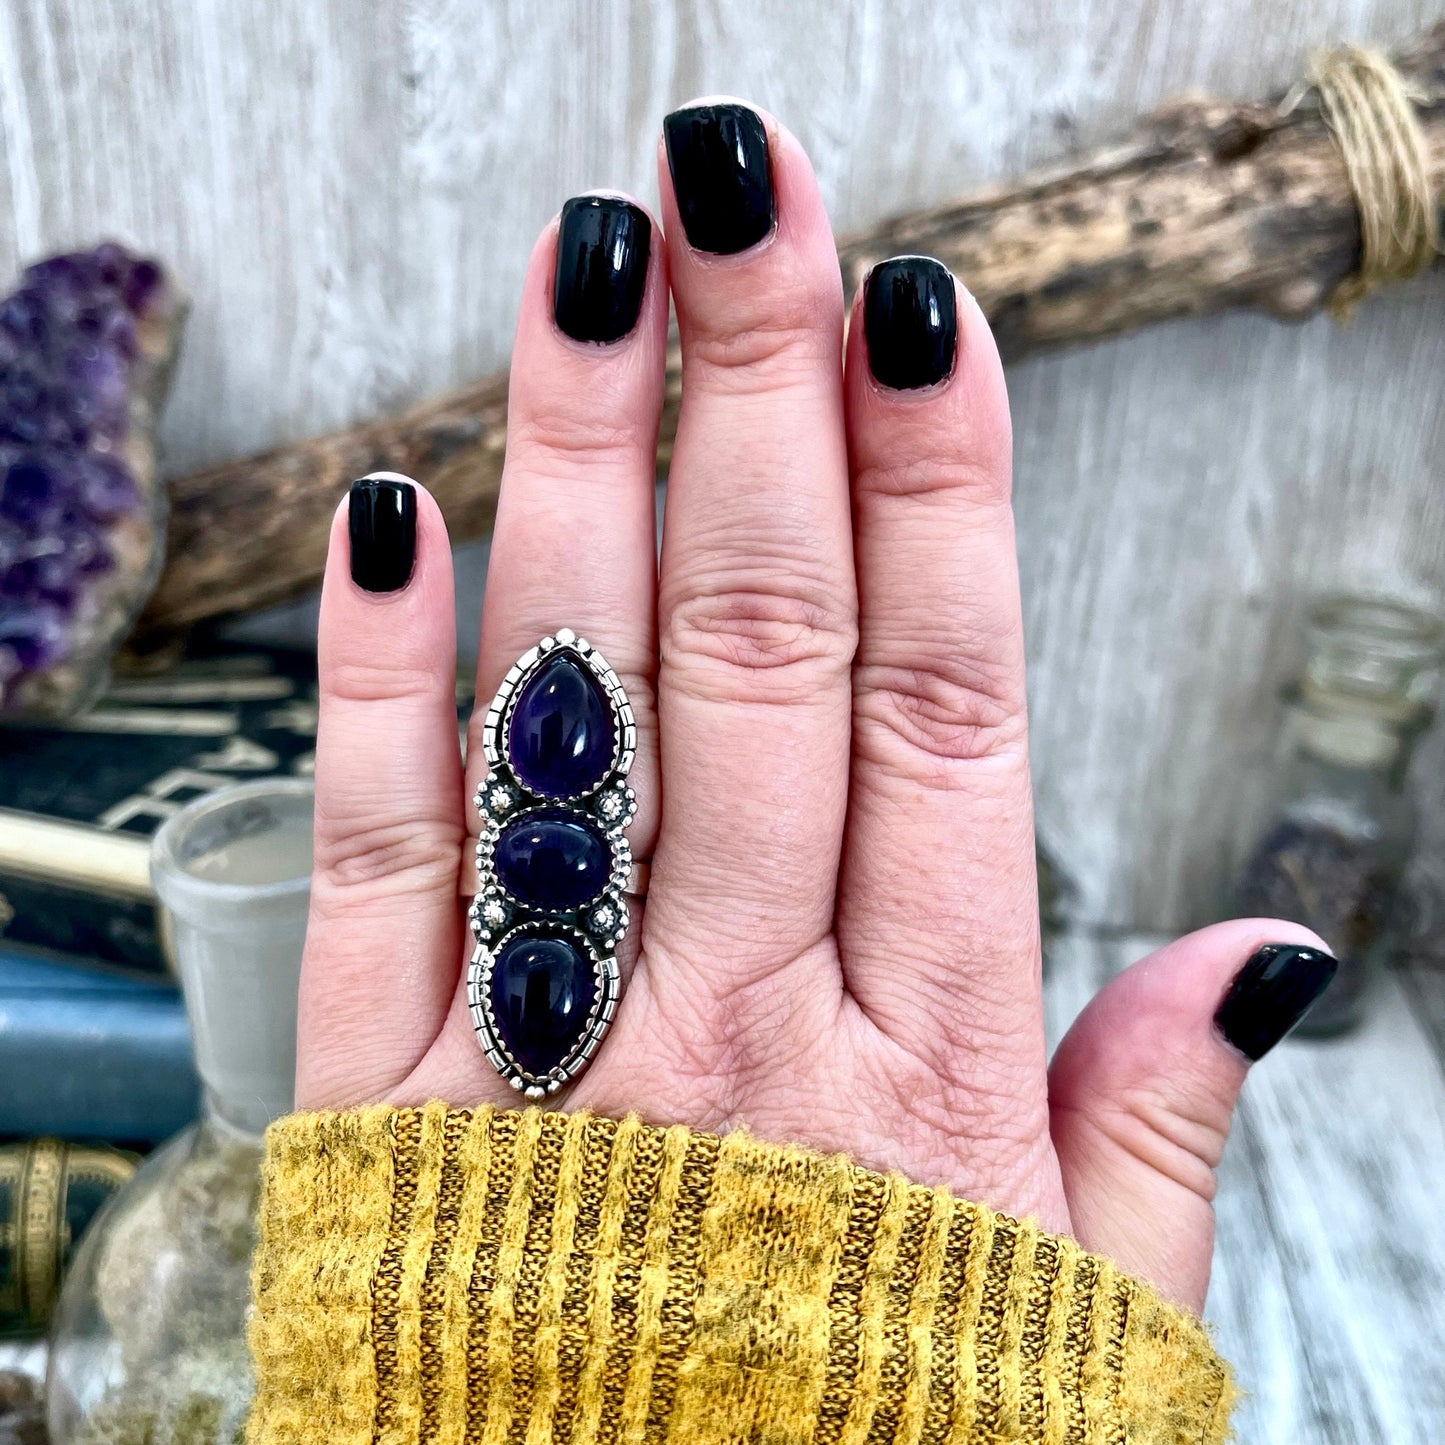 3 Stone Ring, Adjustable Ring, Amethyst Ring, Big Crystal Ring, Big Stone Ring, Bohemian Ring, Boho Jewelry, Boho Ring, Etsy ID: 1333720027, Festival Jewelry, Foxlark- Rings, Gift For Woman, Jewelry, Purple Amethyst, Rings, Statement Rings, Three Stone, W